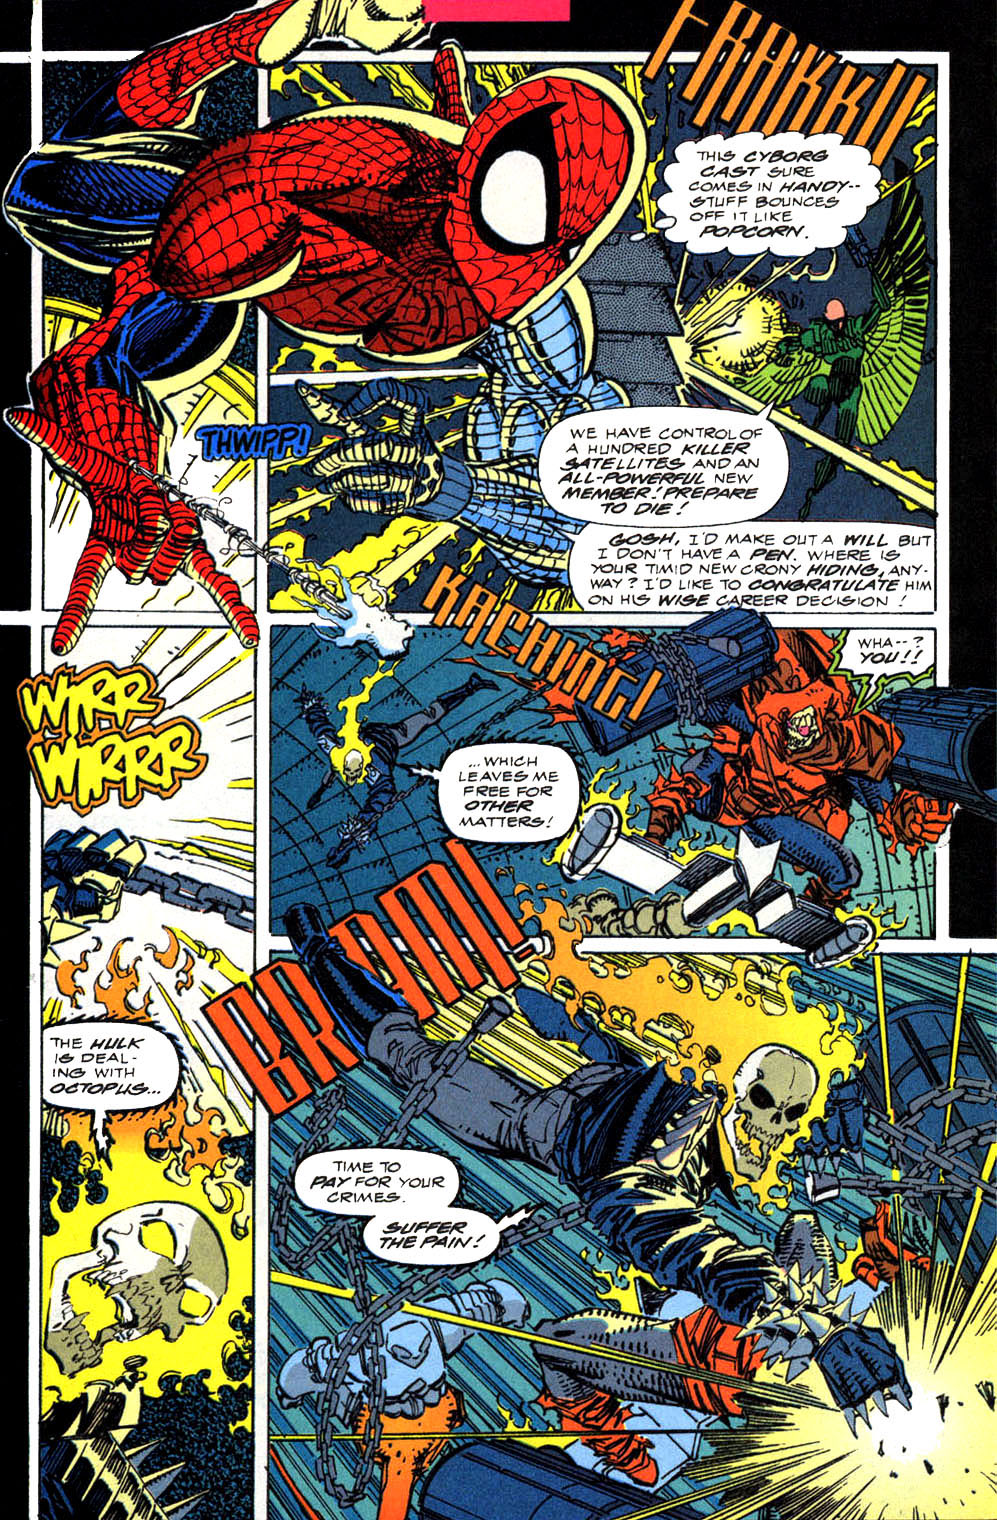 Spider-Man (1990) 22_-_The_Sixth_Member Page 19